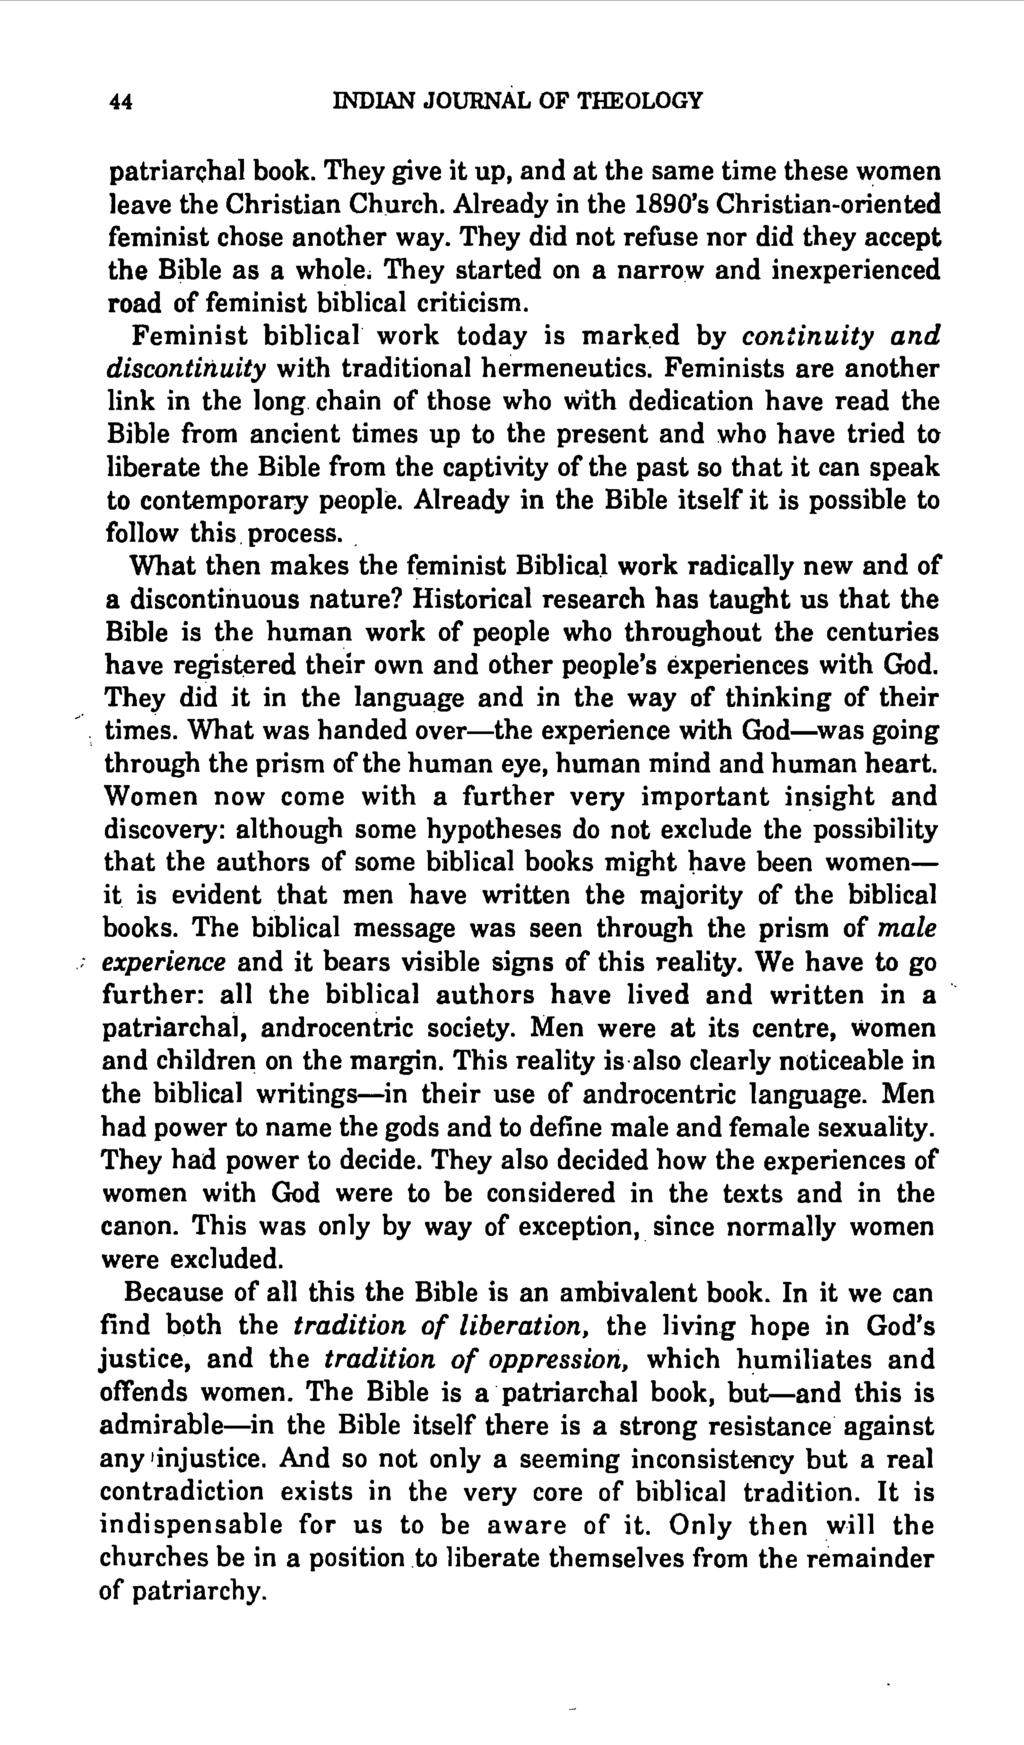 44 INDIAN JOURNAL OF THEOLOGY patriarchal book. They give it up, and at the same time these women leave the Christian Church. Already in the 1890's Christian-oriented feminist chose another way.